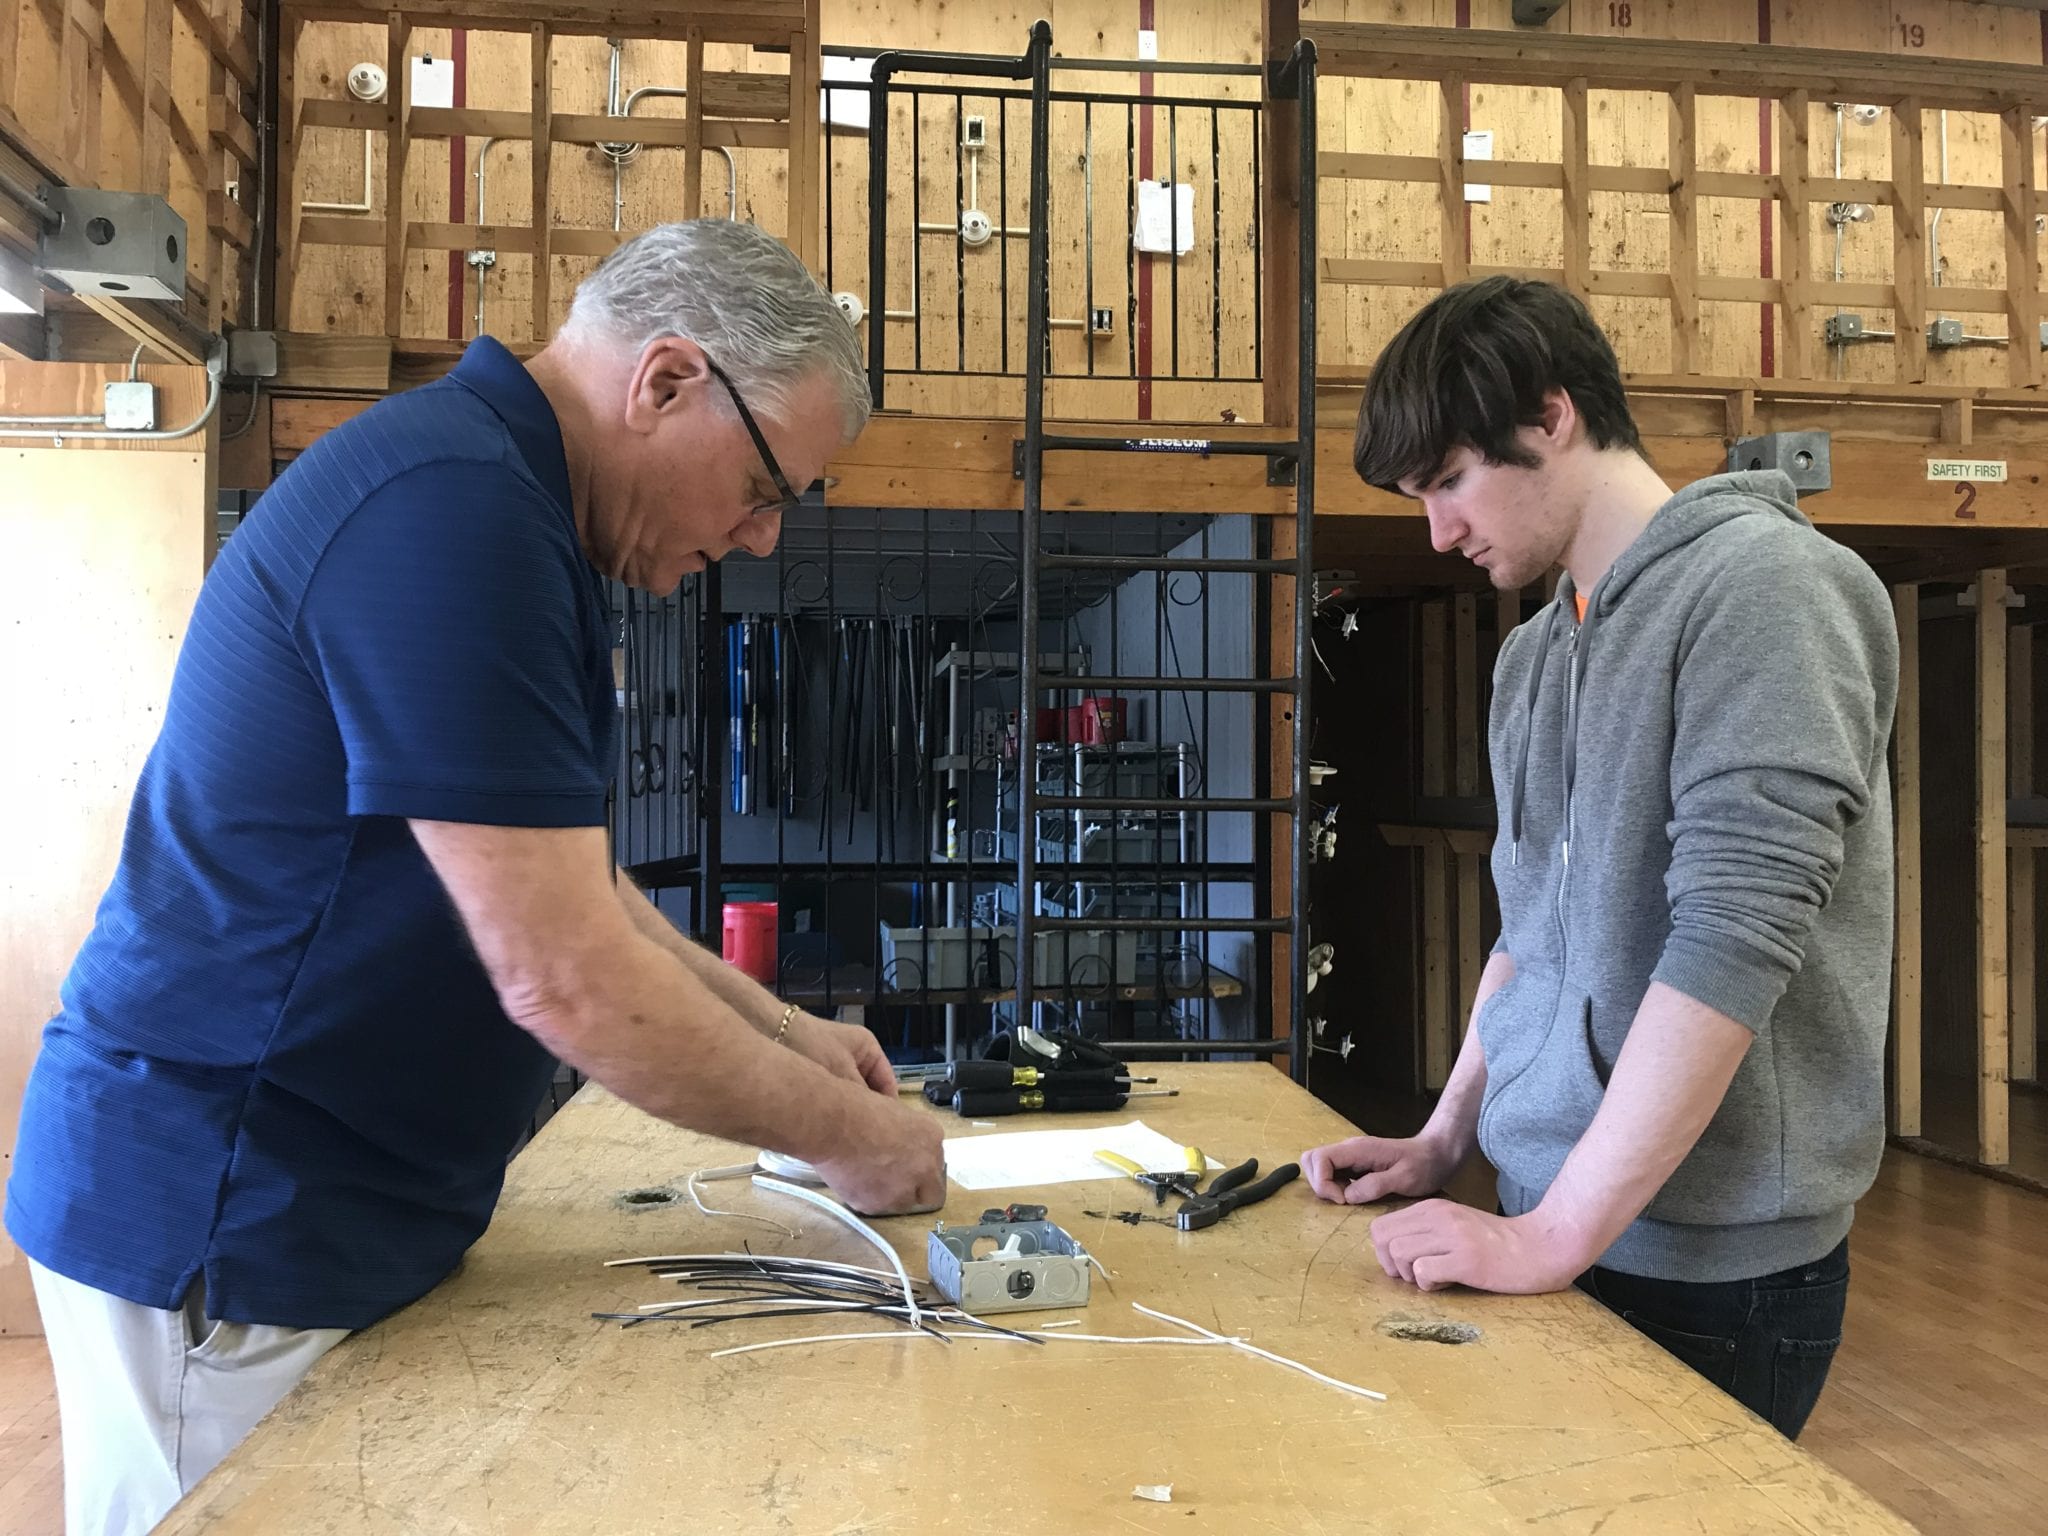 Electrical instructor Frank Barker works with Woburn High School senior Jean Luc Walsh on wiring a power switch. (Courtesy Photo)